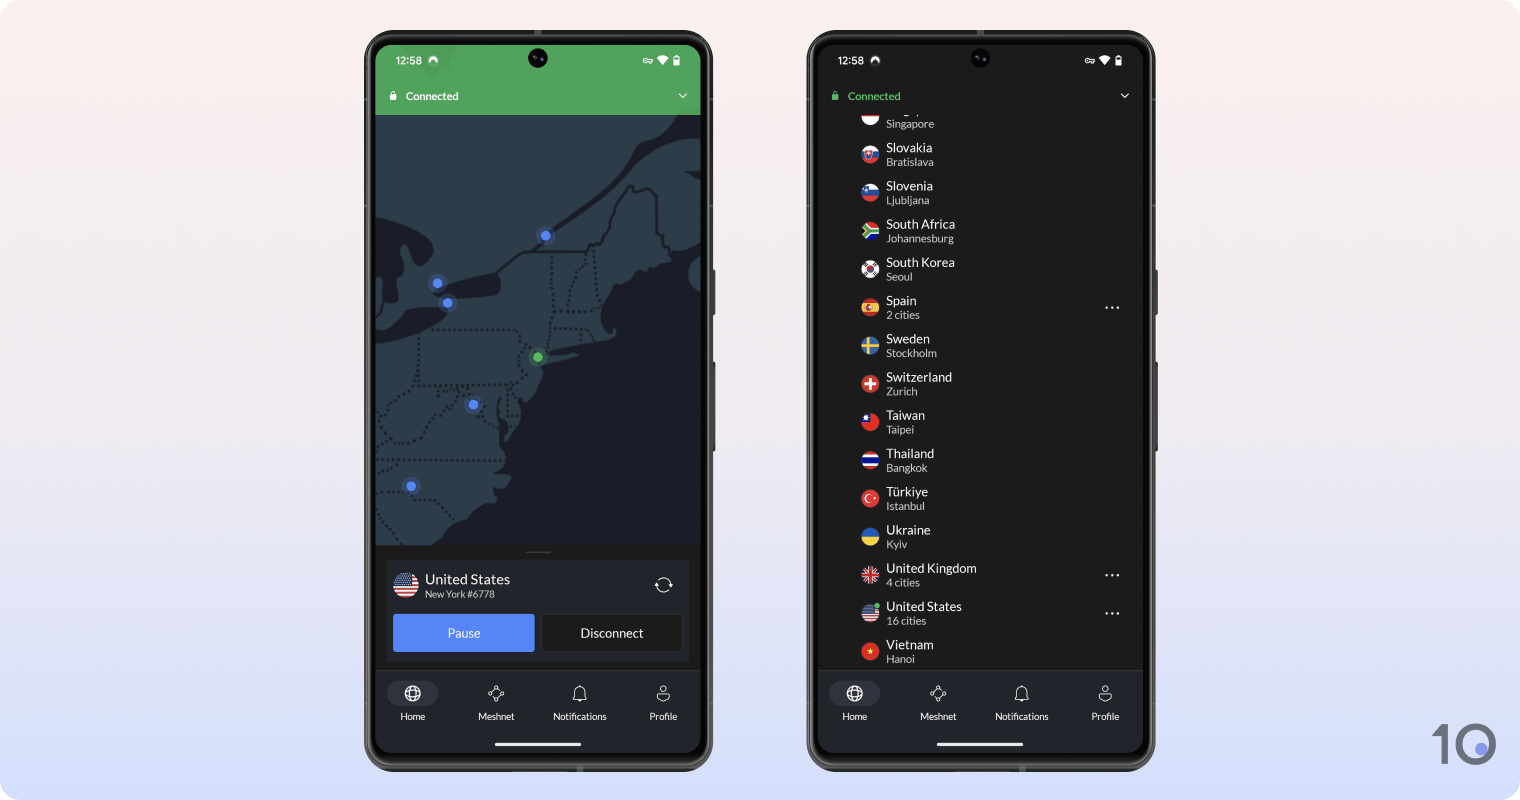 NordVPN's app for Android